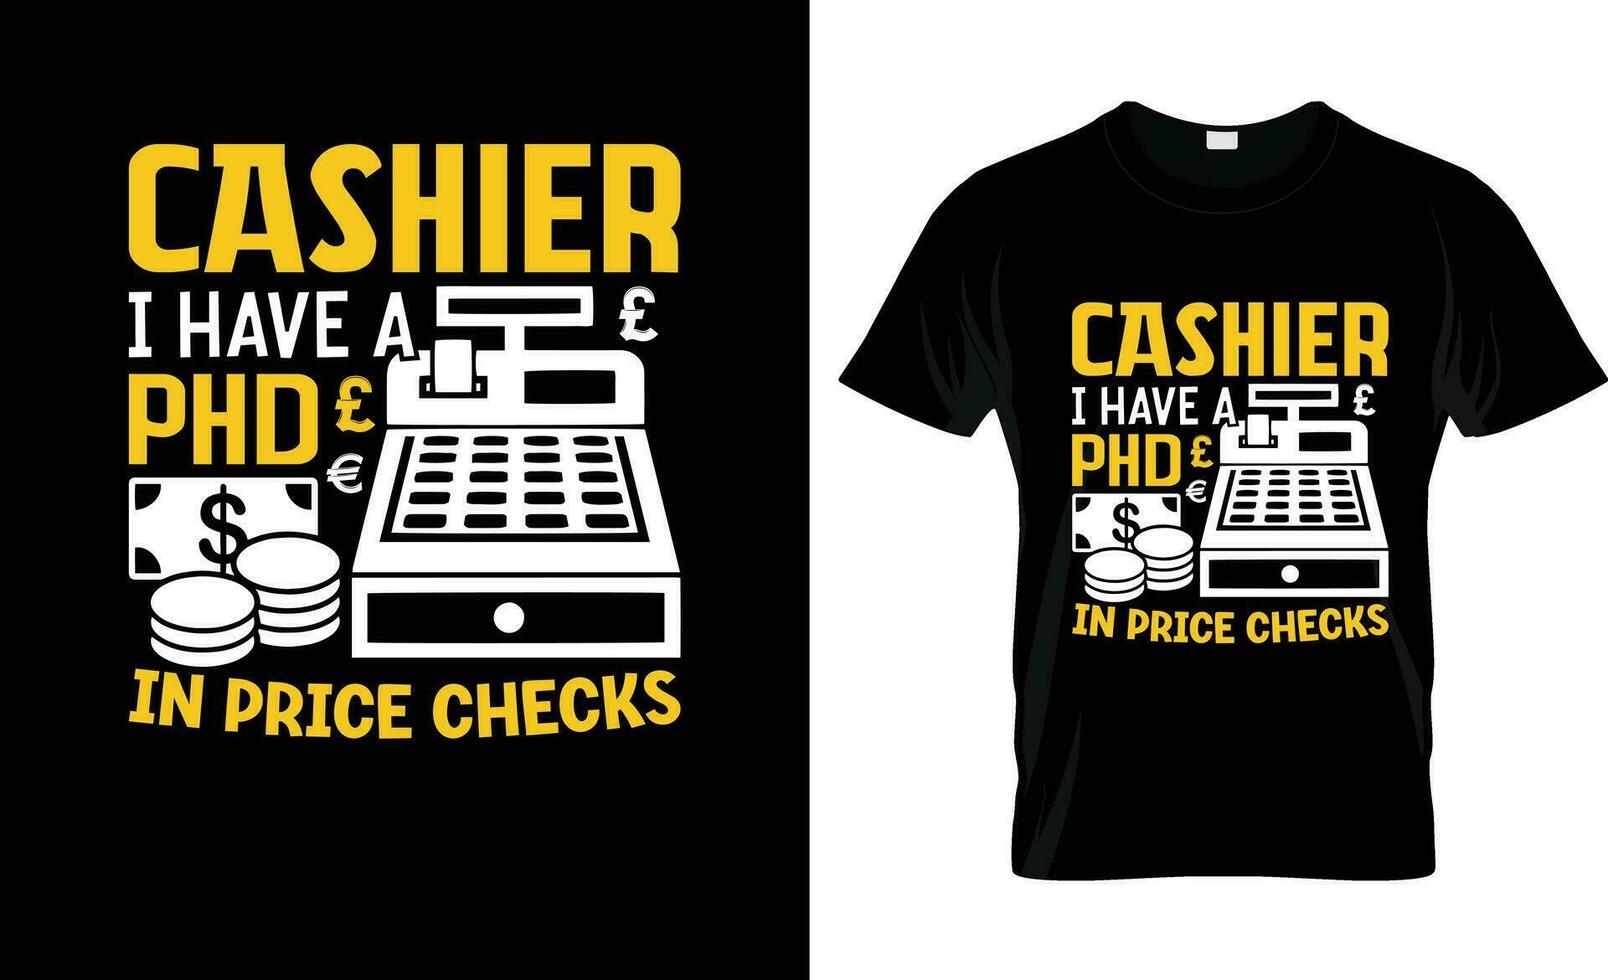 cashier i have a phd in price checks colorful Graphic T-Shirt,t-shirt print mockup vector